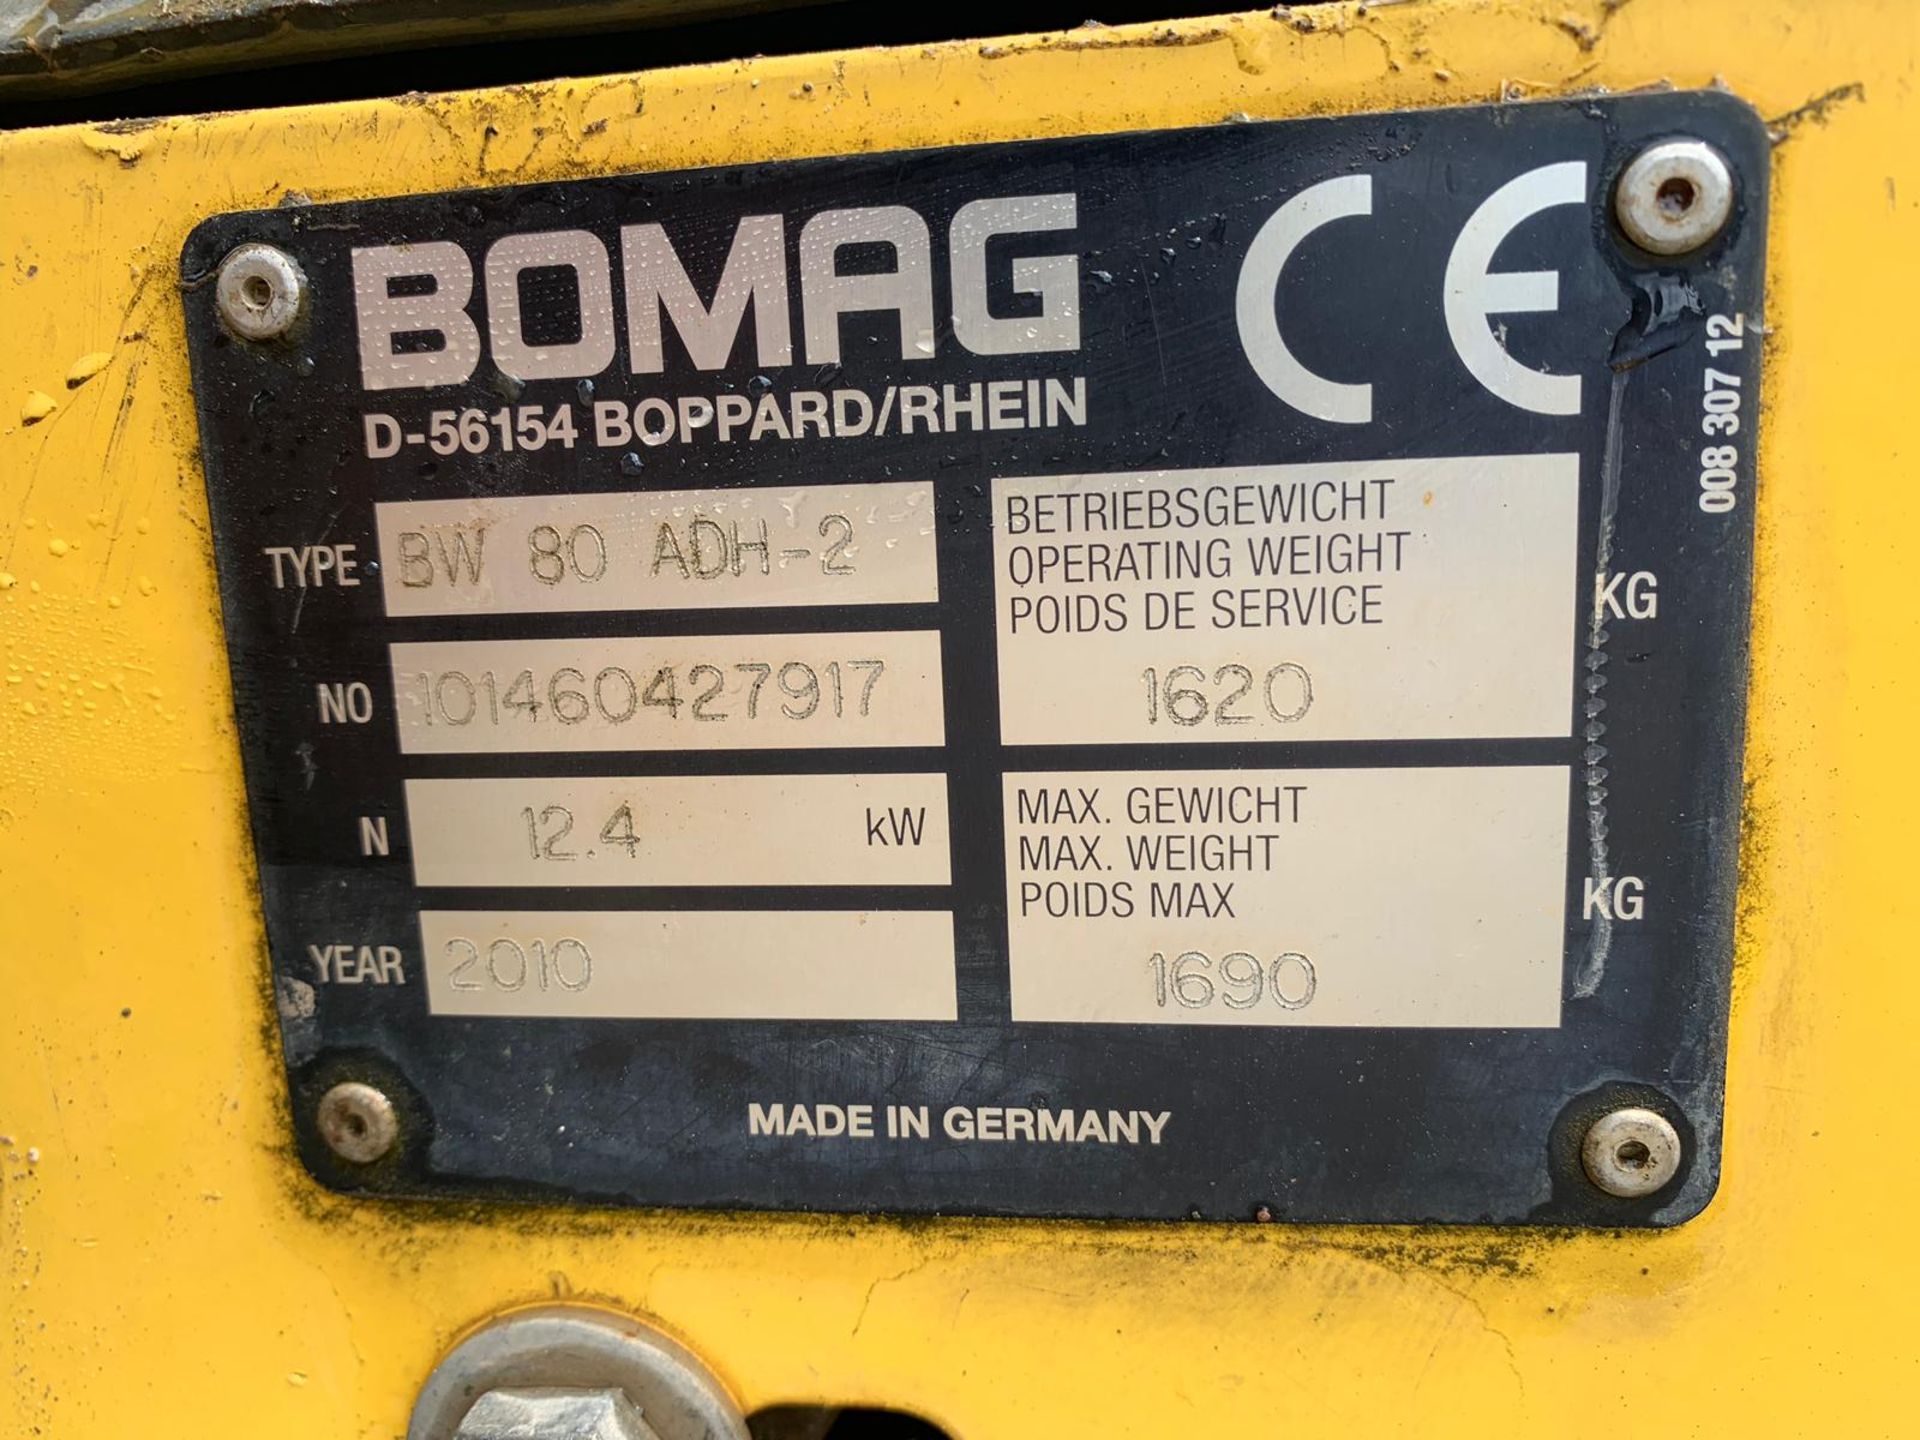 BOMAG BW 80 ADH-2 TWIN DRUM RIDE ON ROLLER *PLUS VAT* - Image 7 of 10